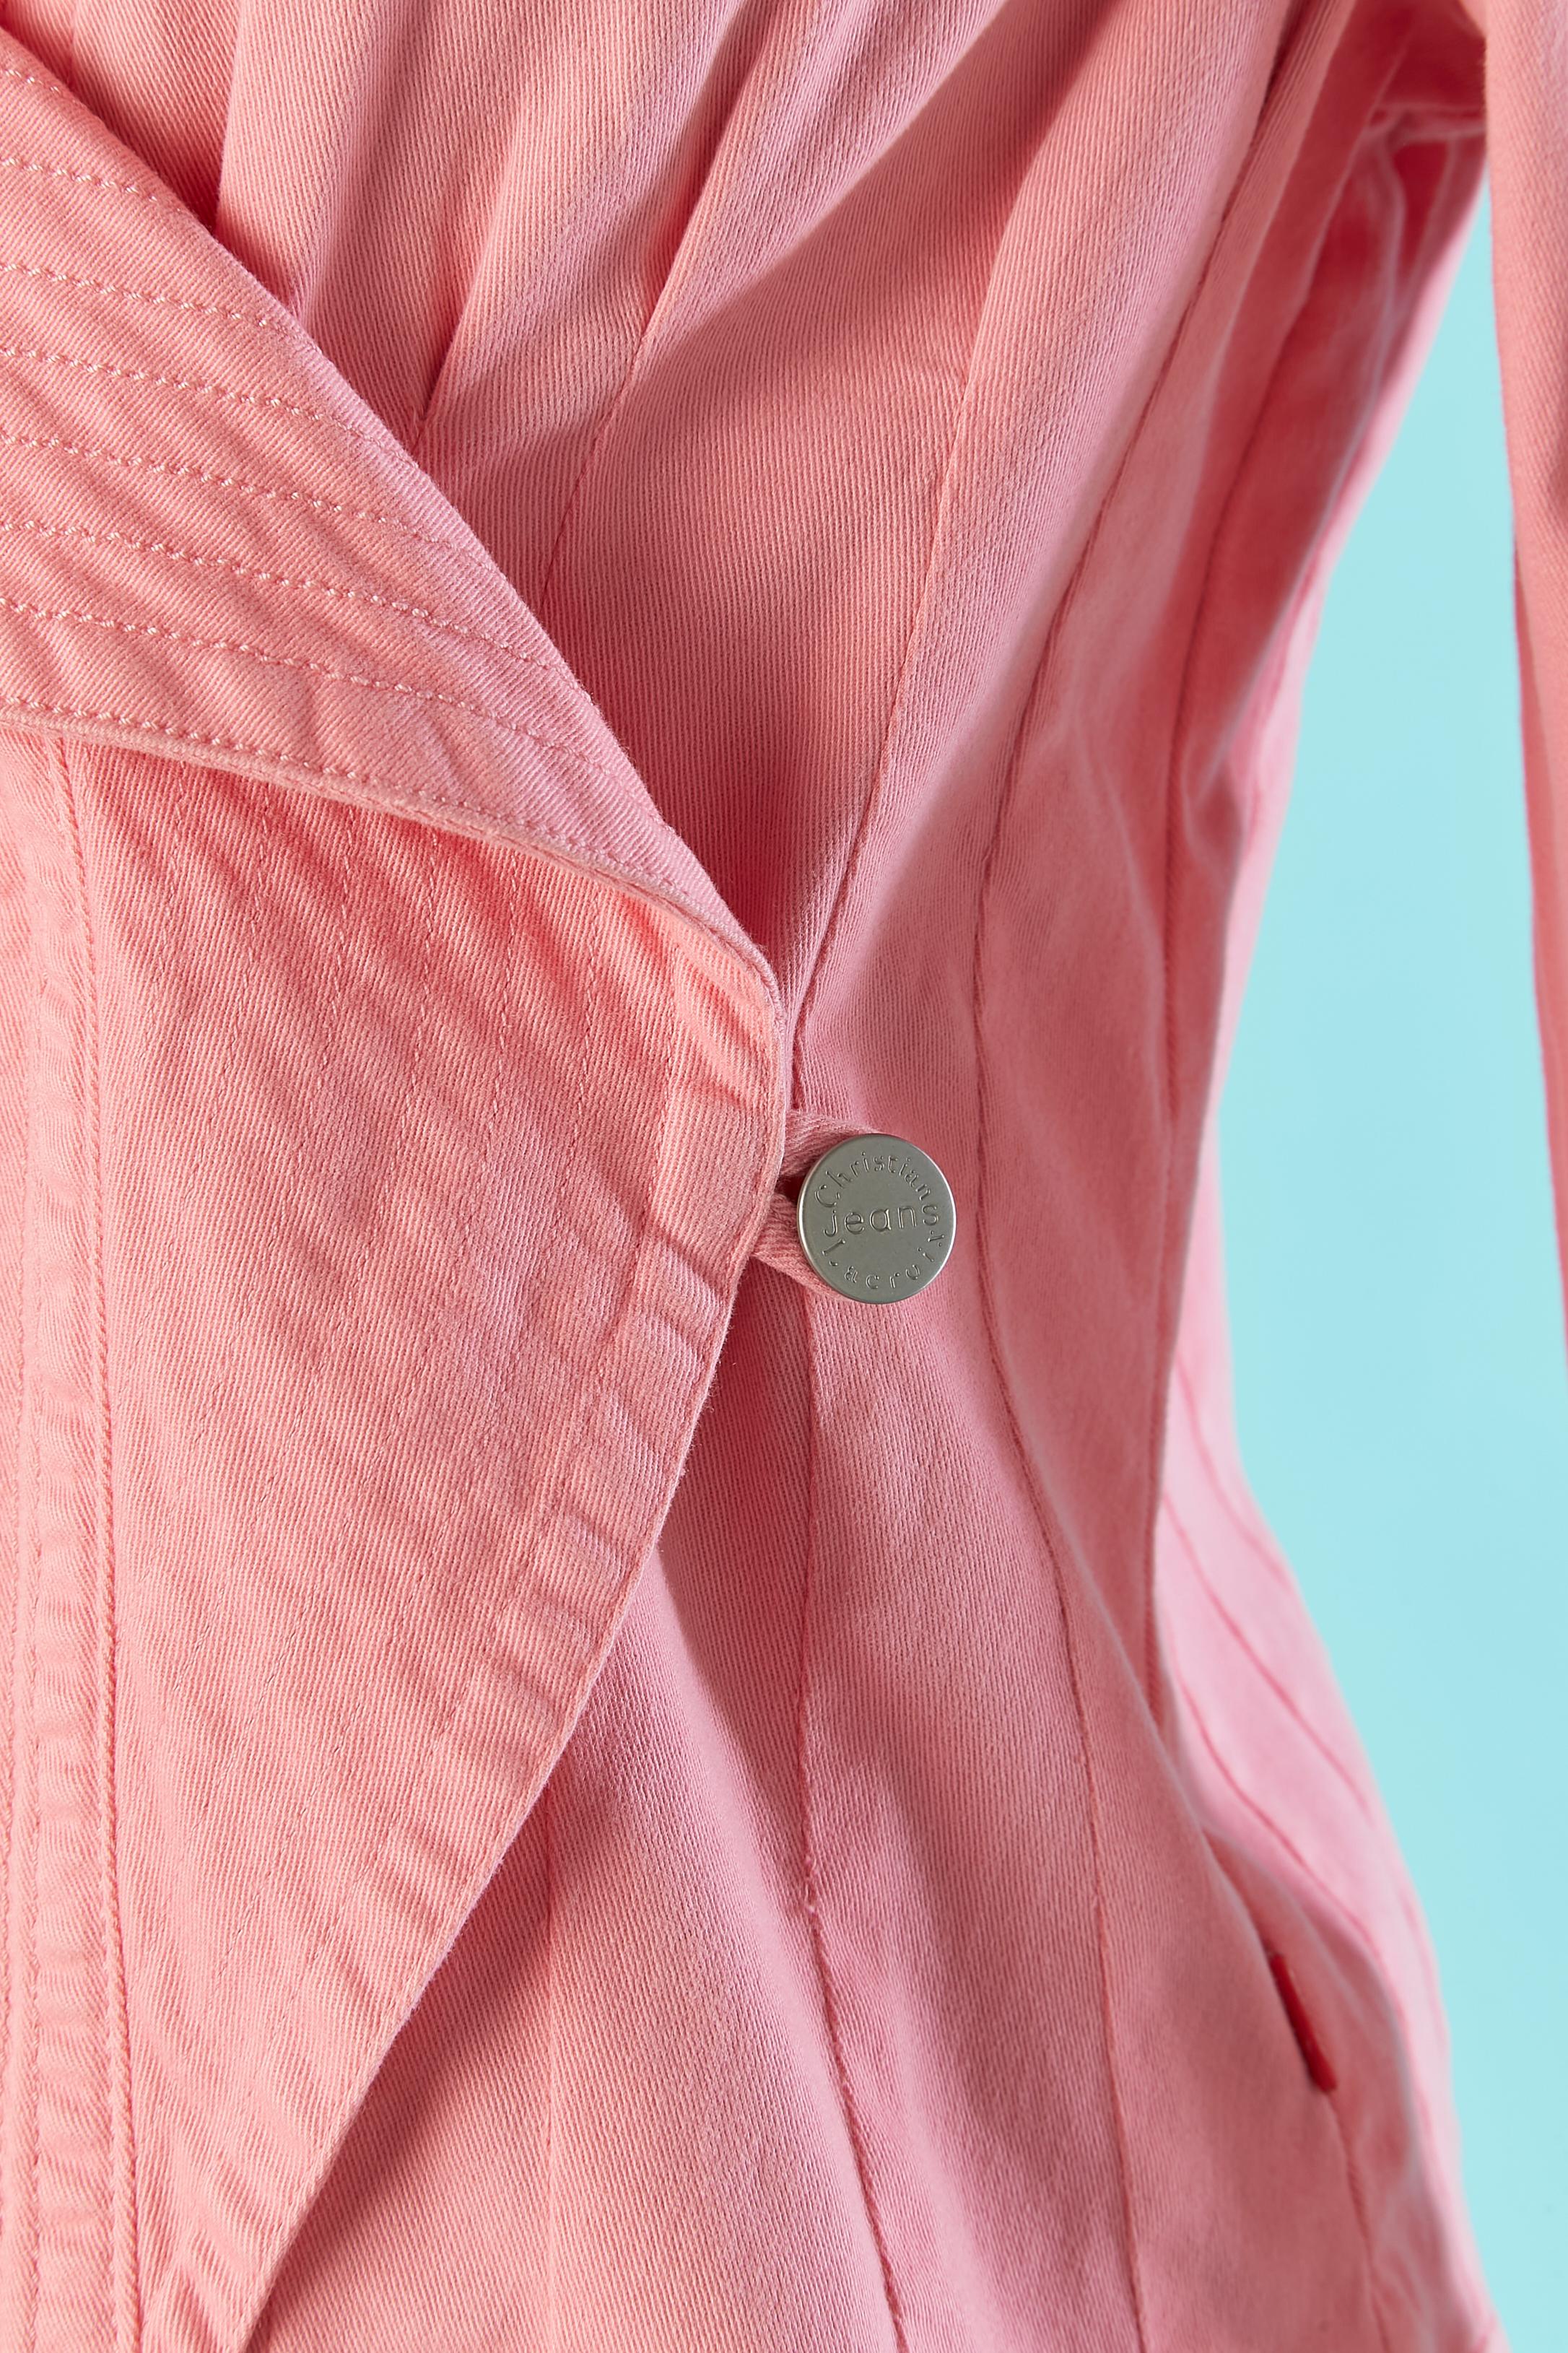 Pink cotton double-breasted jacket with top-stitched collar. Hidden zip in the middle front and branded buttons. 
Fabric composition: 98% cotton, 2% stretch
SIZE M ( but very small back width)